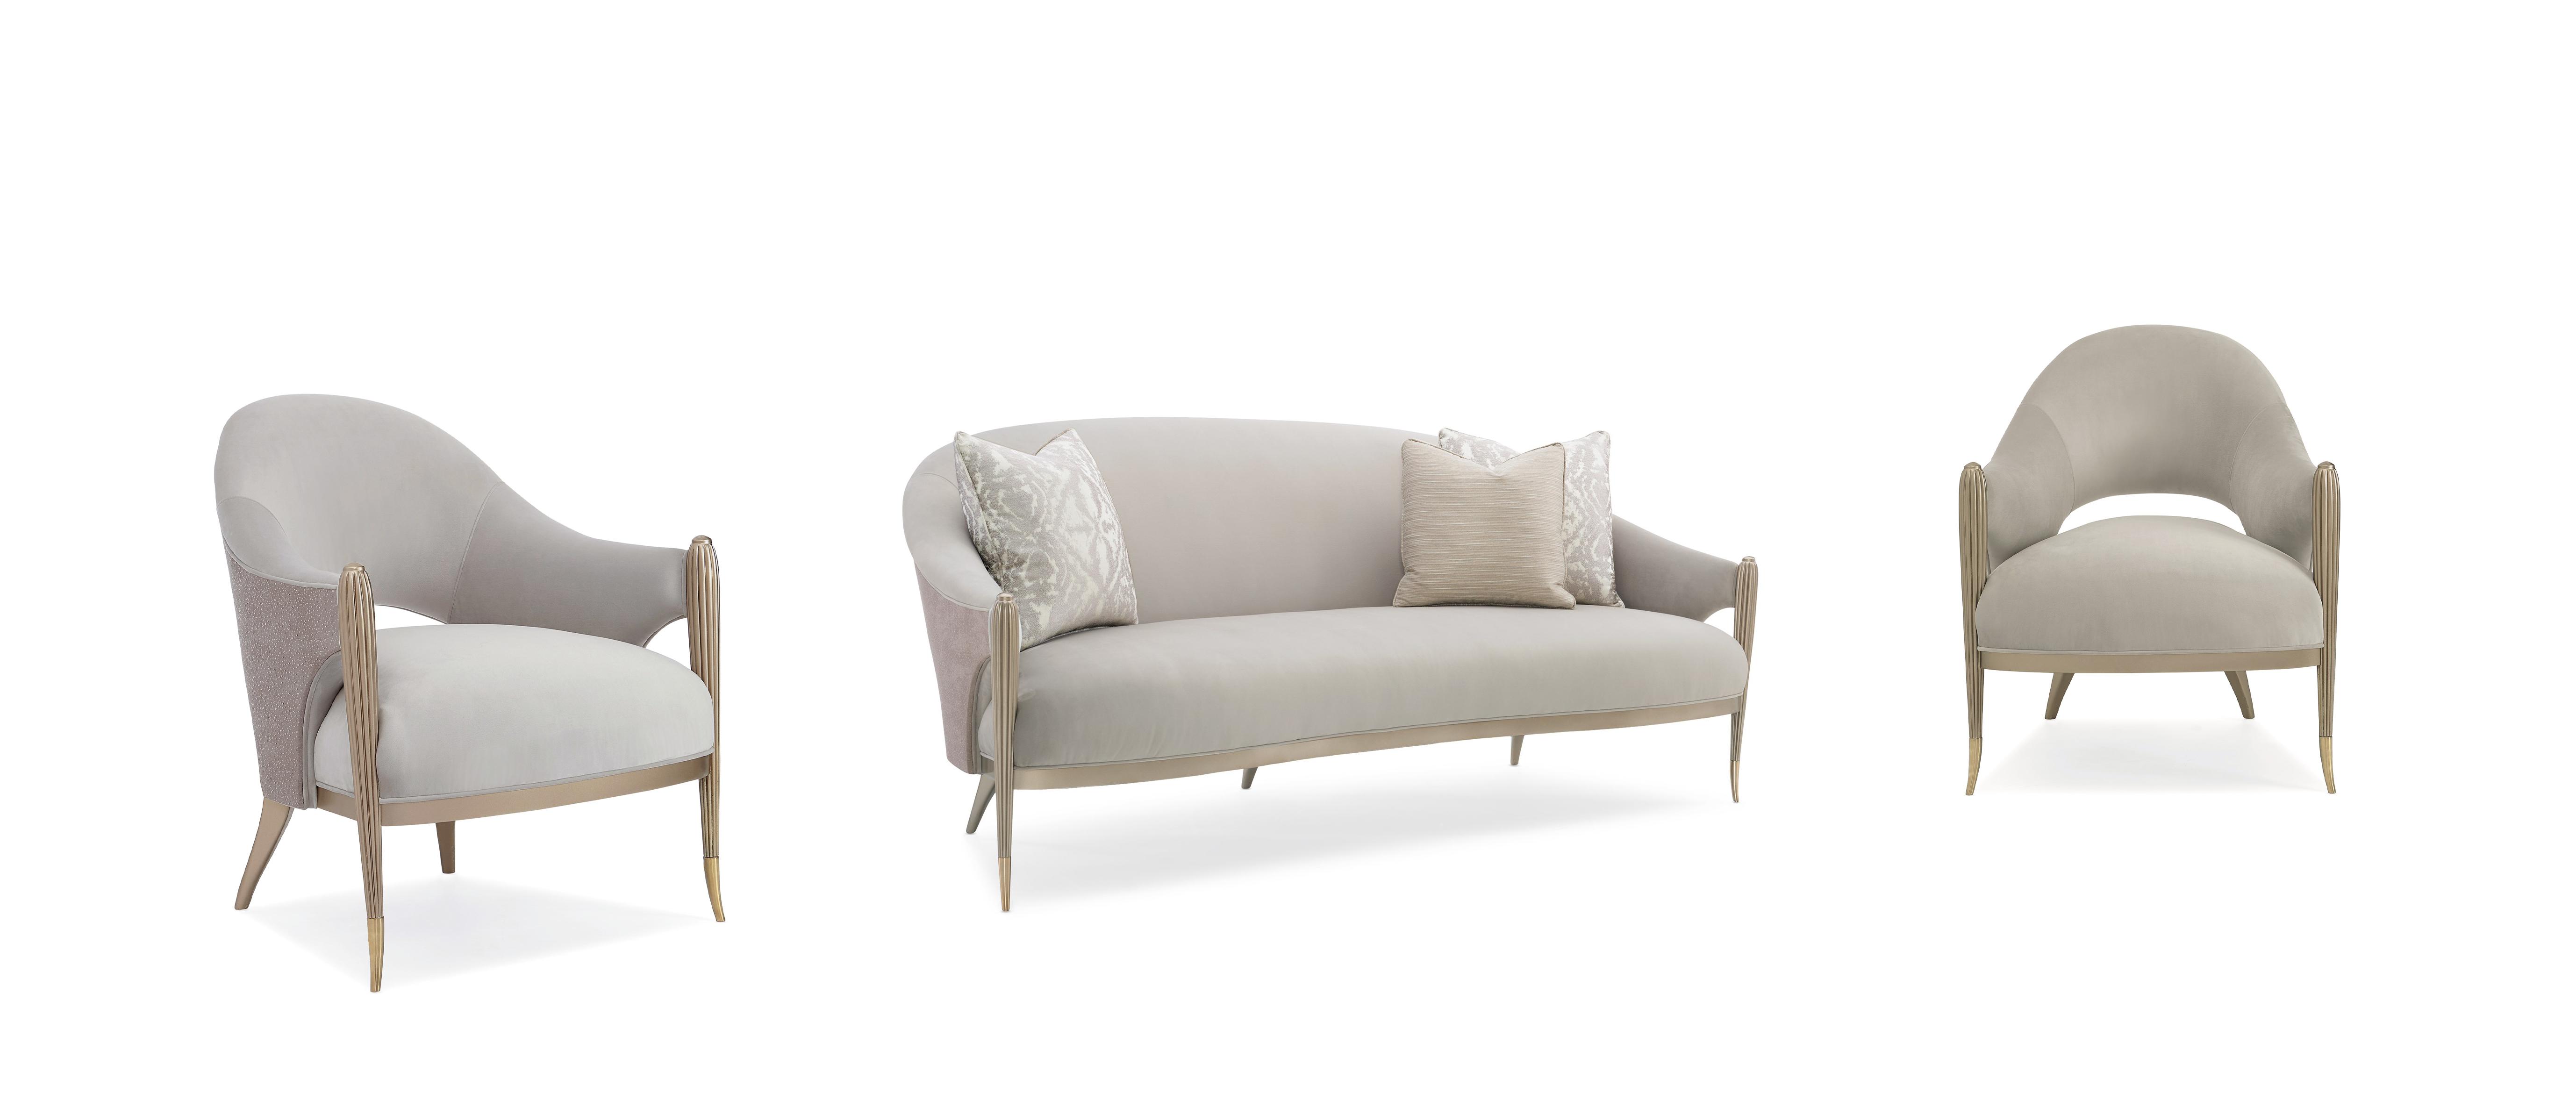 Contemporary Sofa and Chair PRETTY LITTLE THING UPH-019-111-A-3PC in Light Gray Fabric